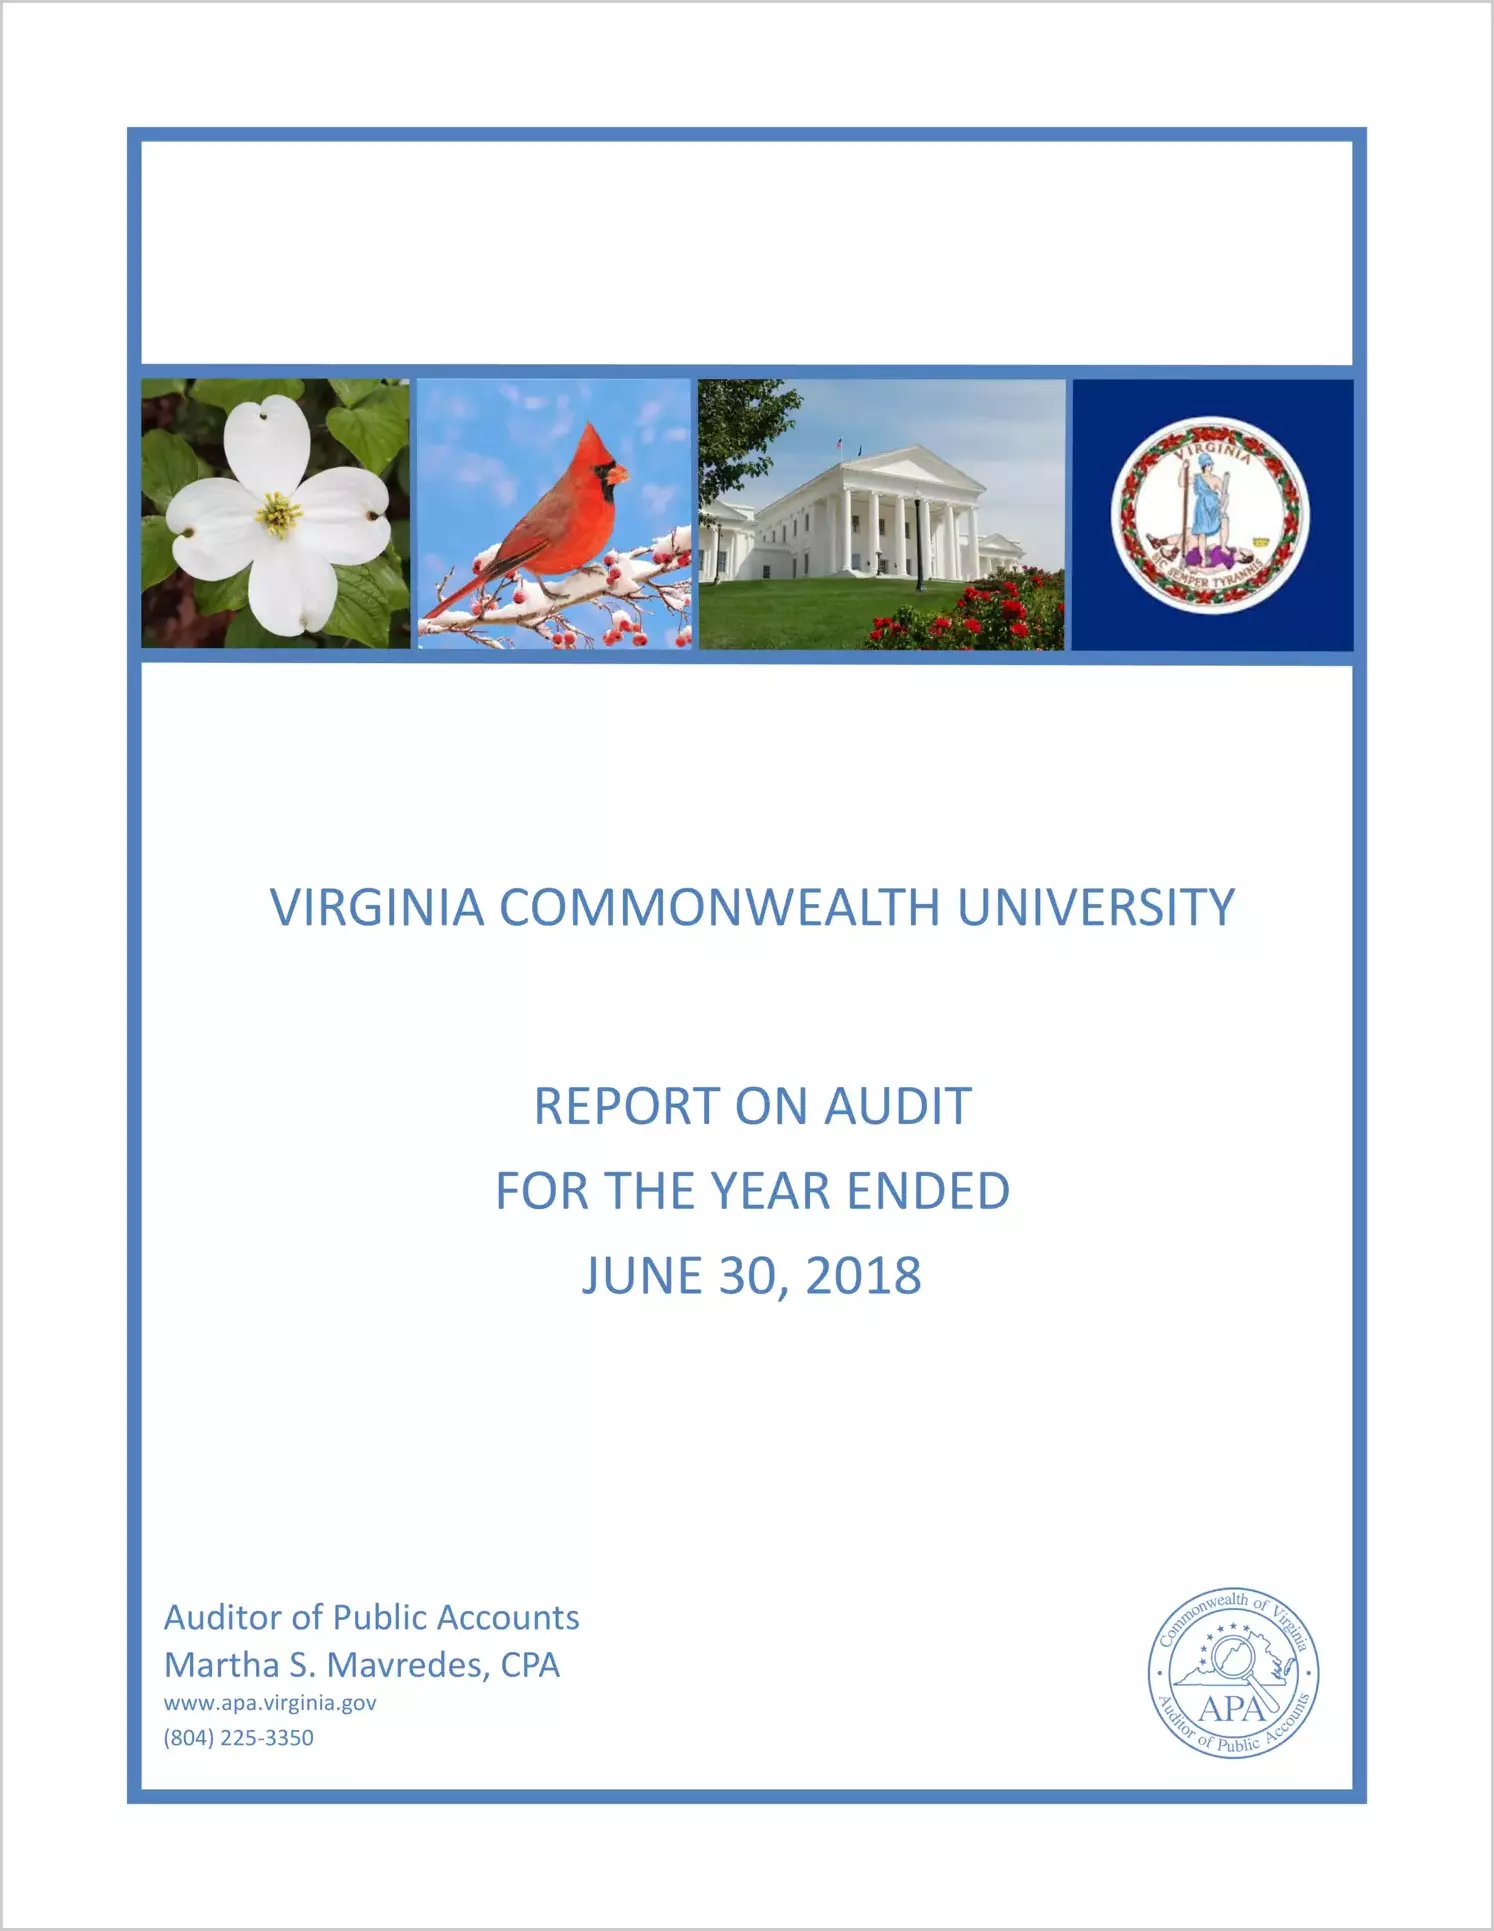 Virginia Commonwealth University for the year ended June 30, 2018